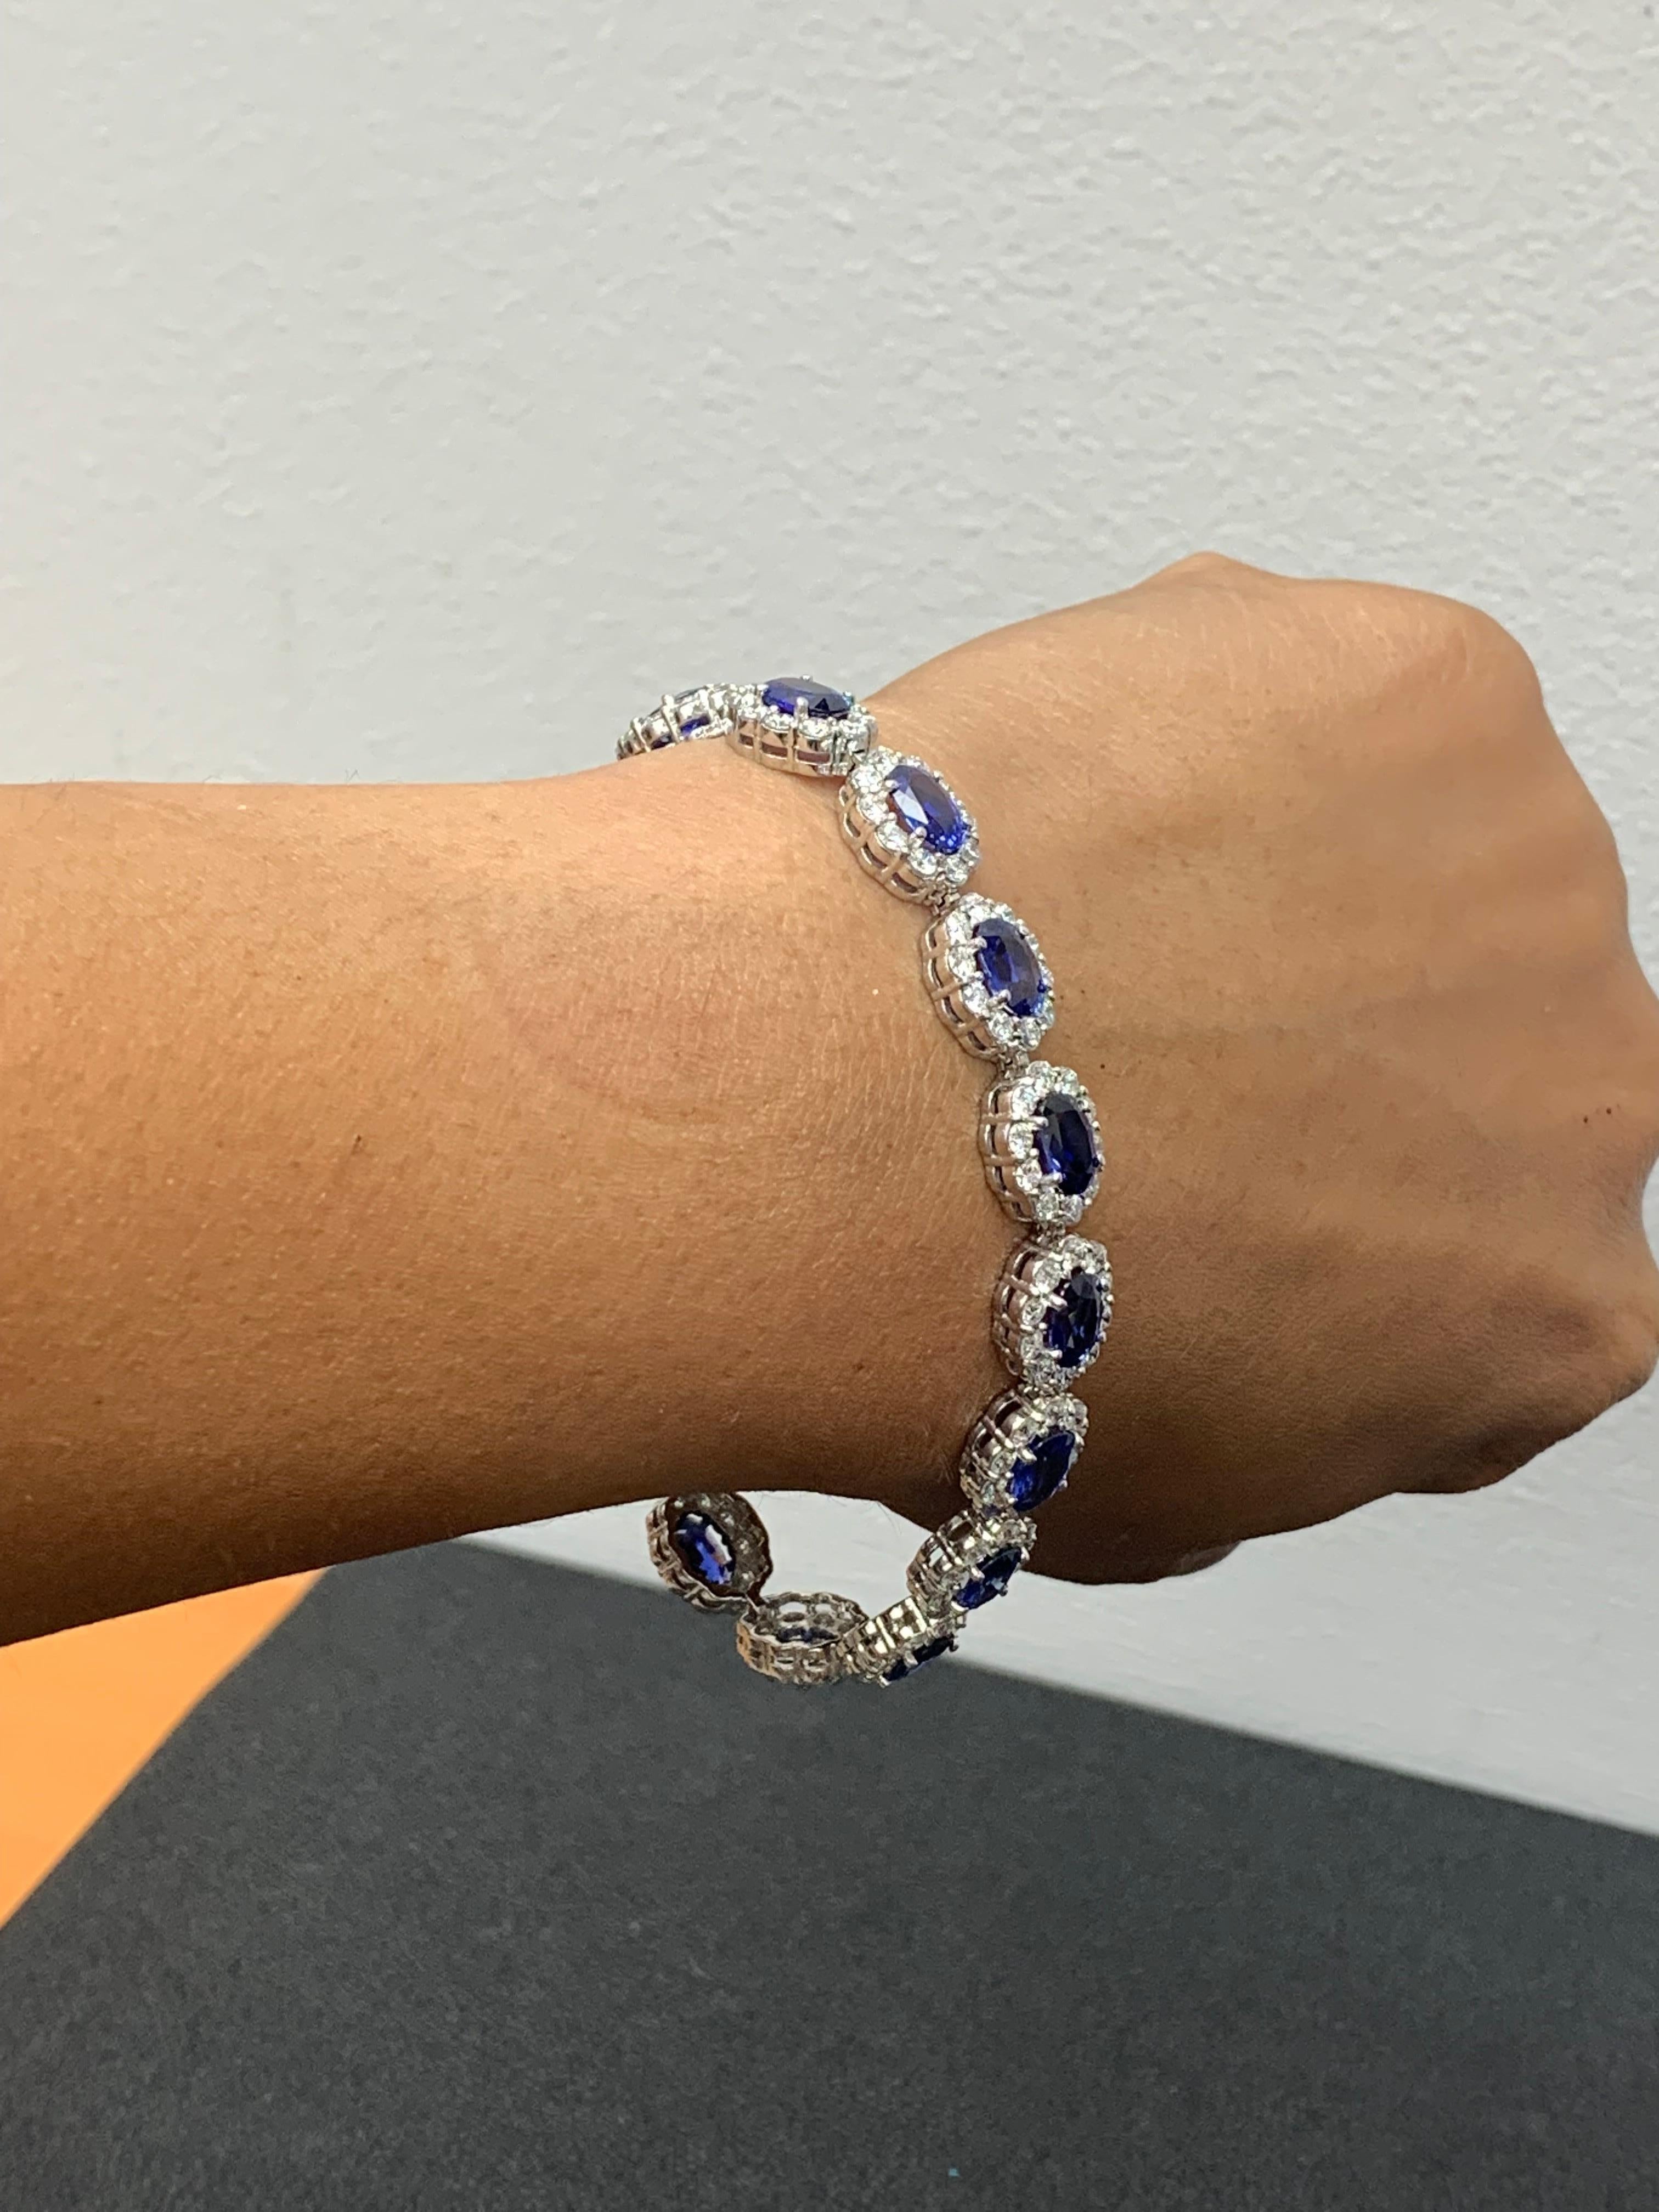 Modern 13.88 Carat Oval Cut Blue Sapphire and Diamond Halo Bracelet in 14K White Gold For Sale